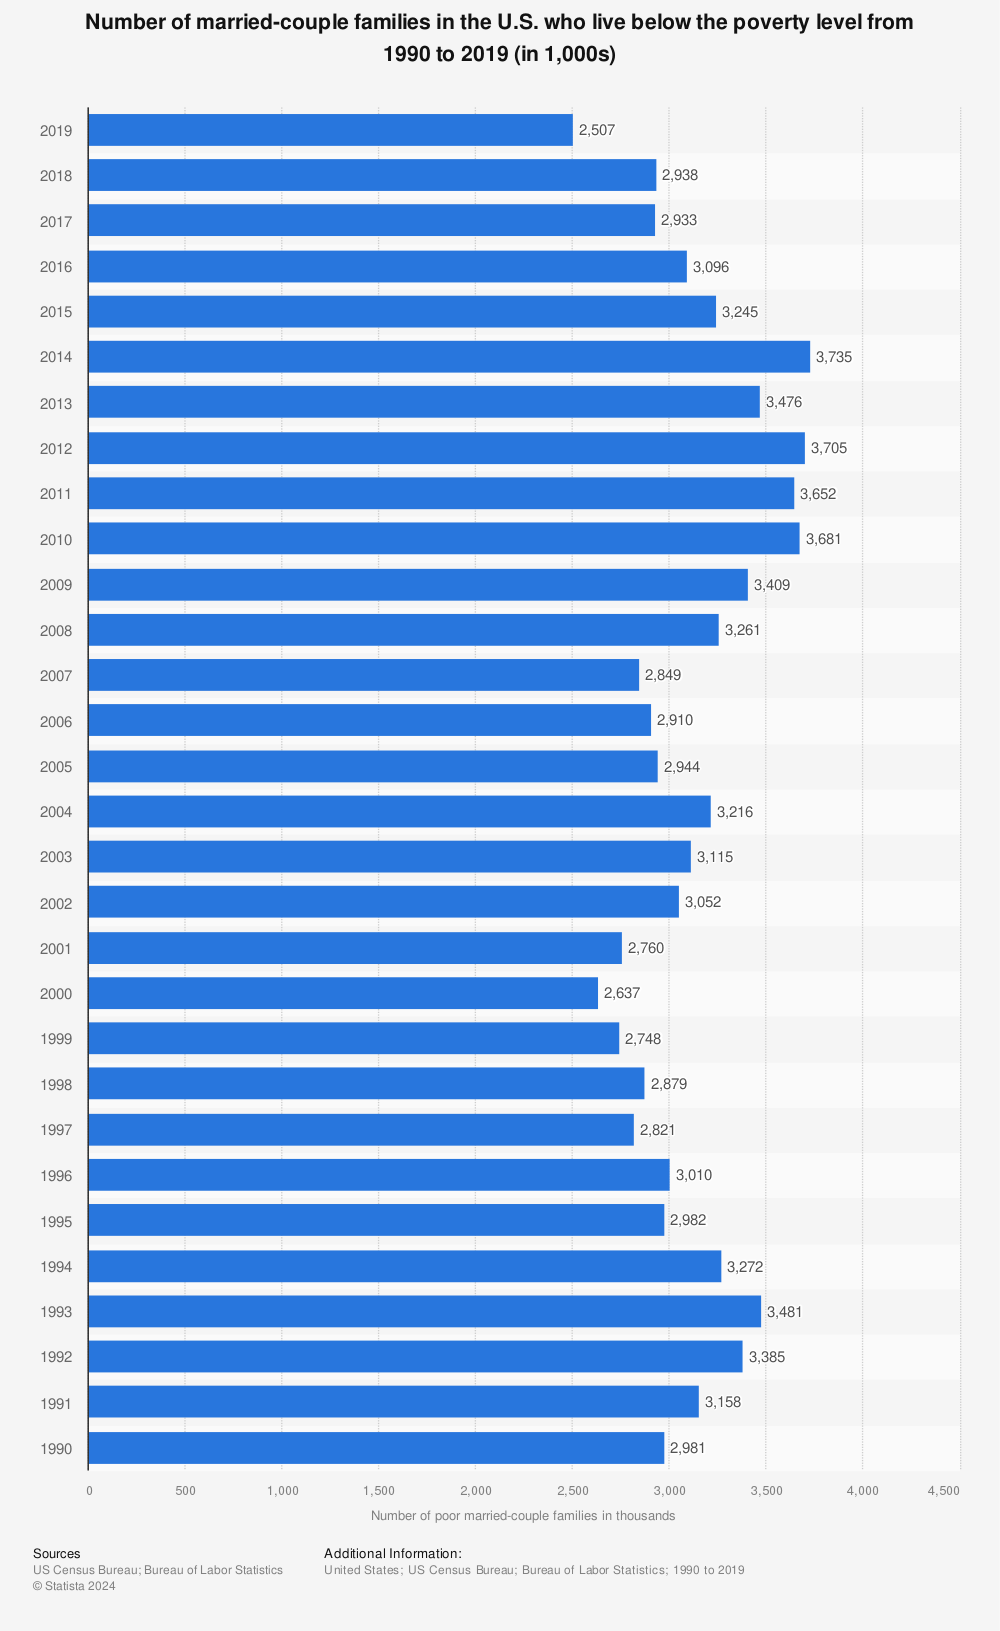 Statistic: Number of married-couple families in the U.S. who live below the poverty level from 1990 to 2019 (in 1,000s) | Statista